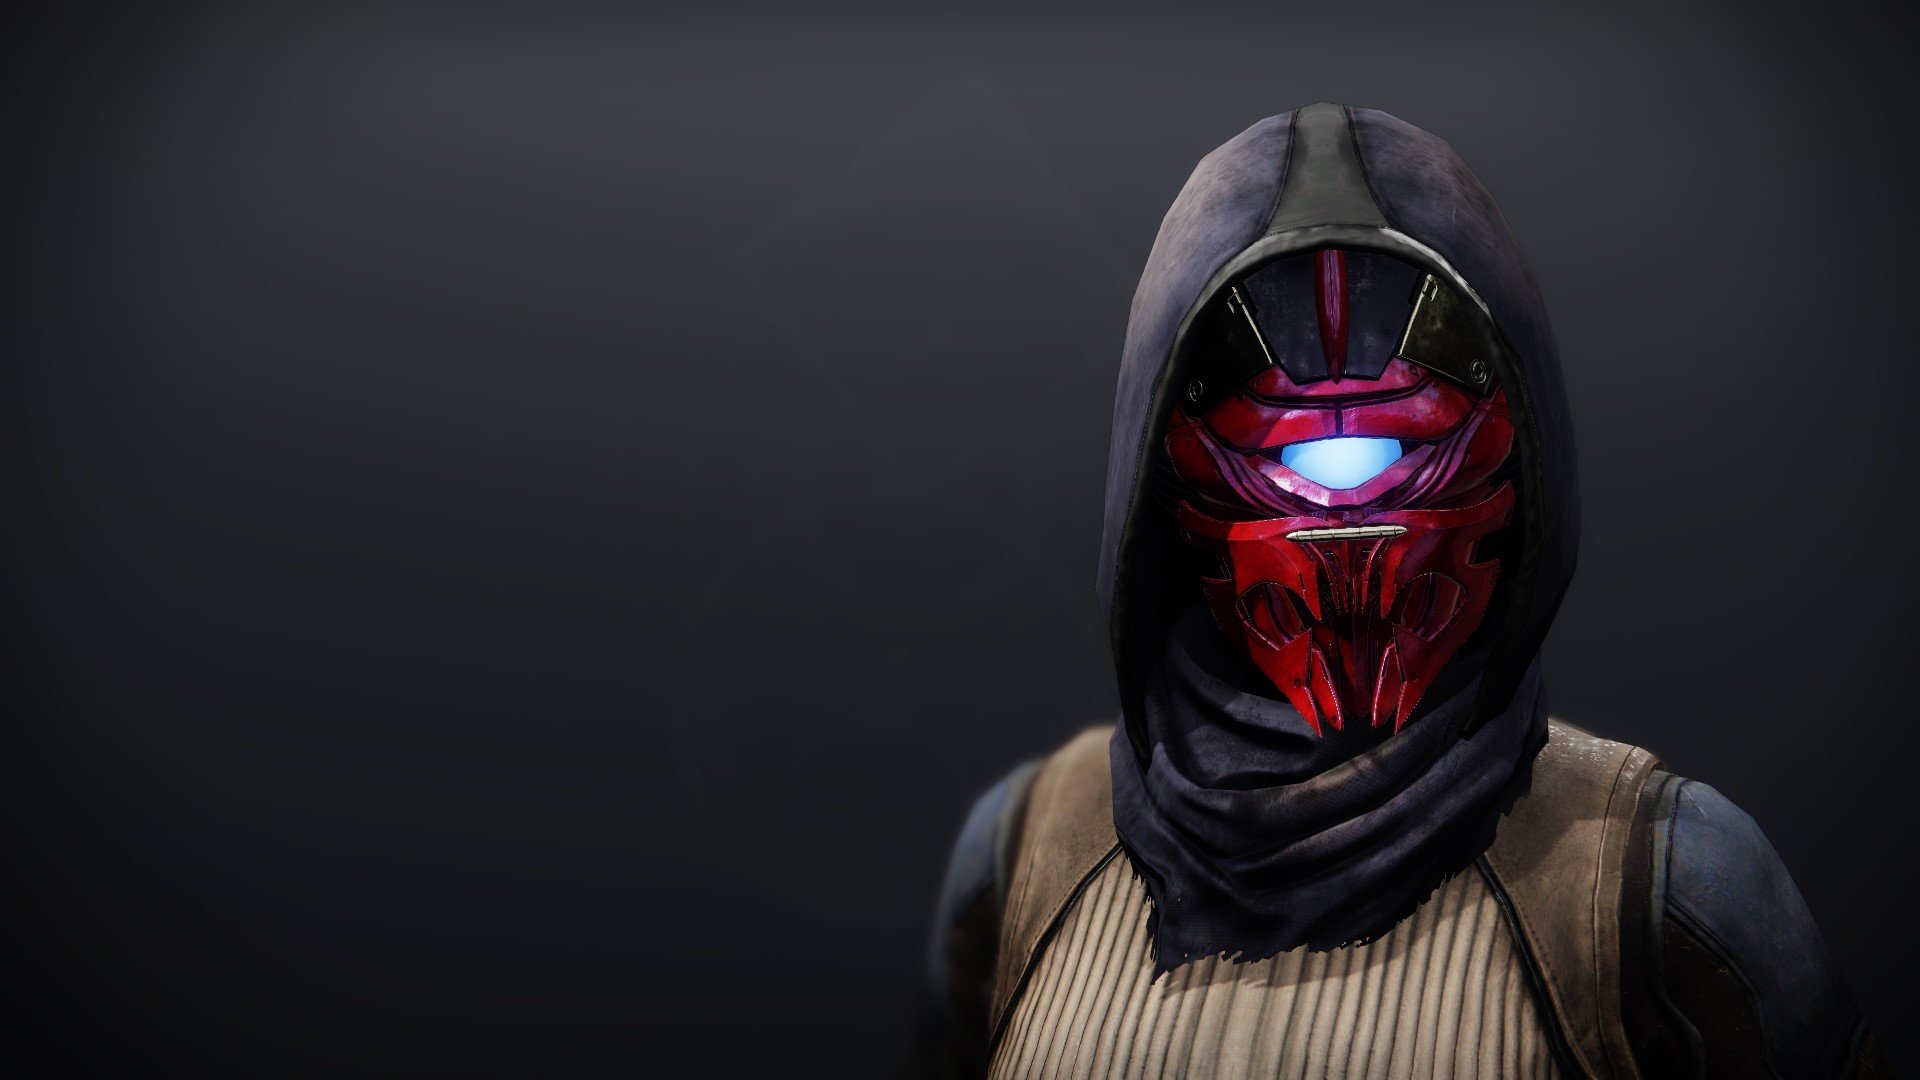 An in-game render of the Tusked Allegiance Mask.